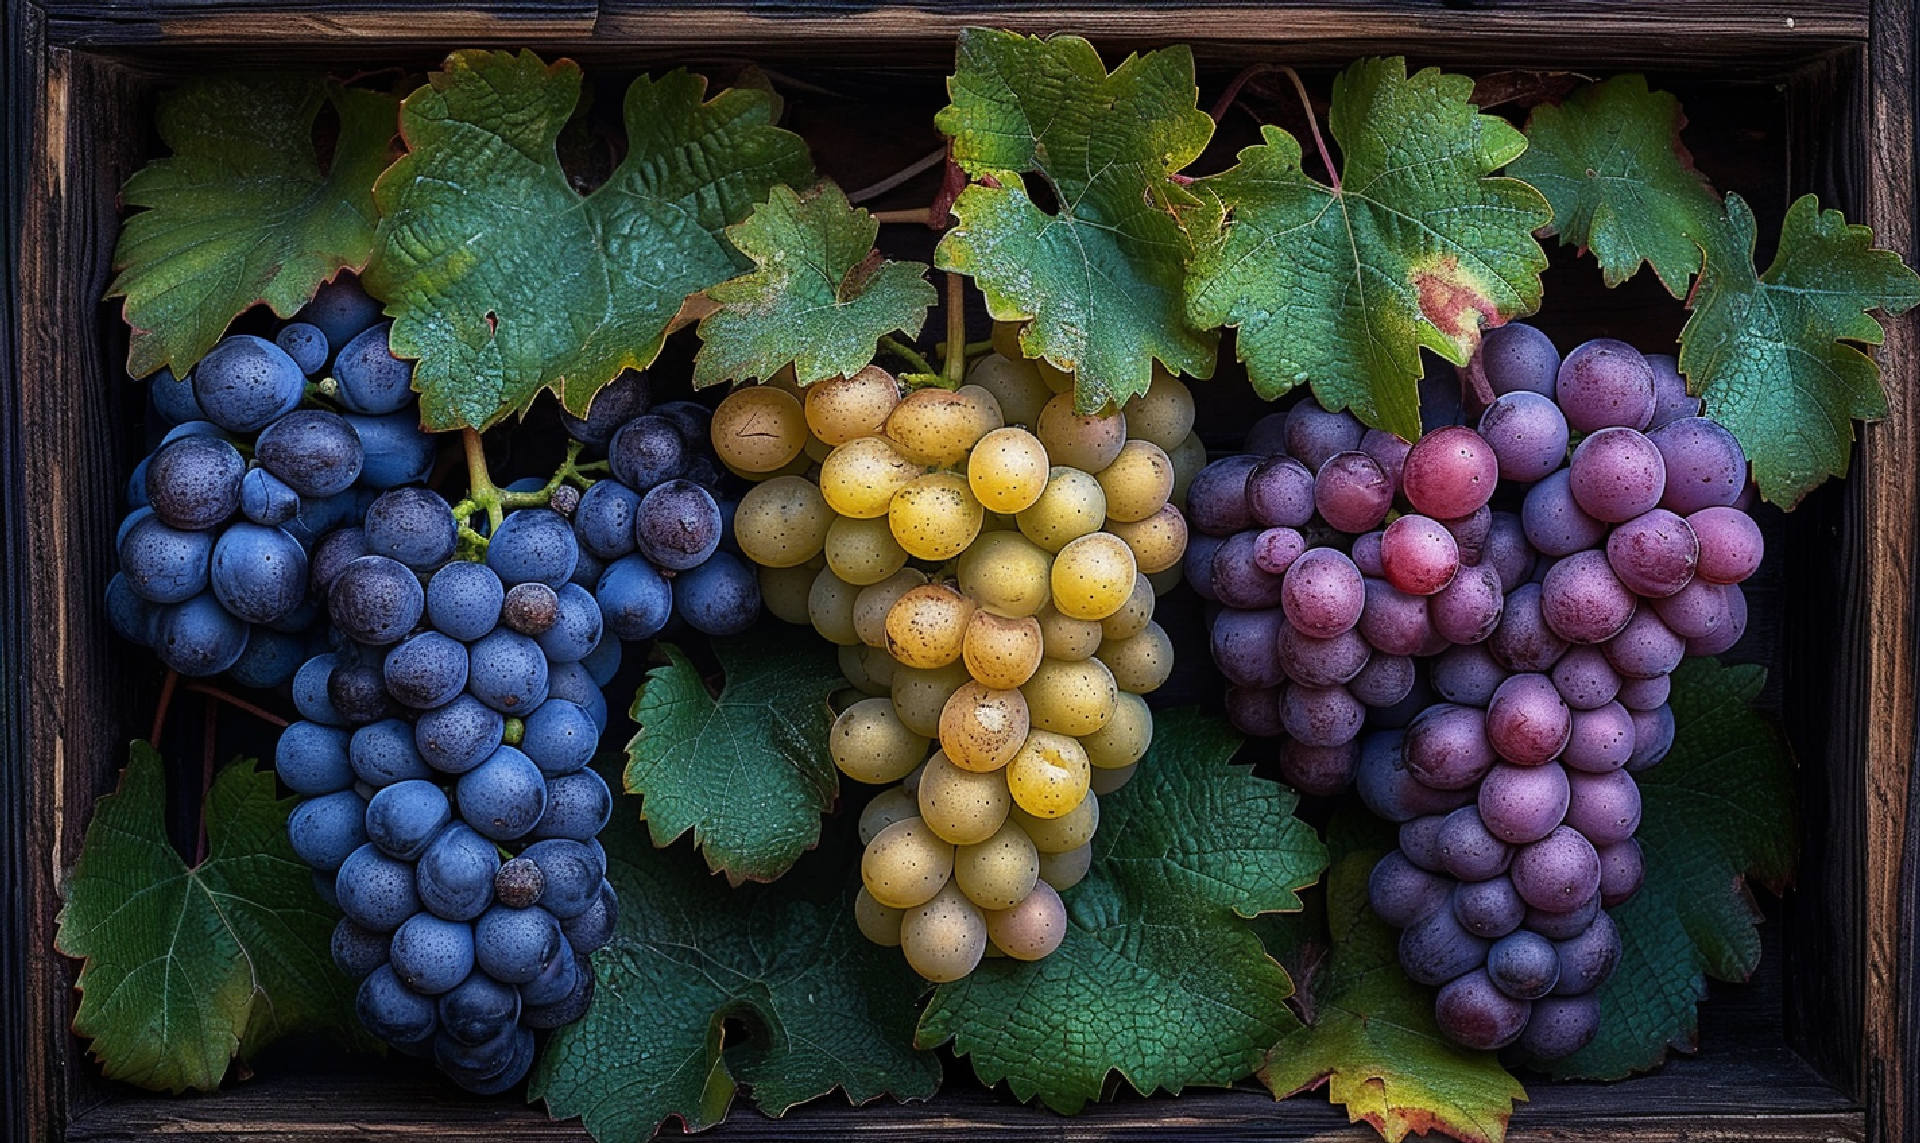 image showcasing the distinct colors and textures of Chenin Blanc and Sauvignon Blanc grapes, 